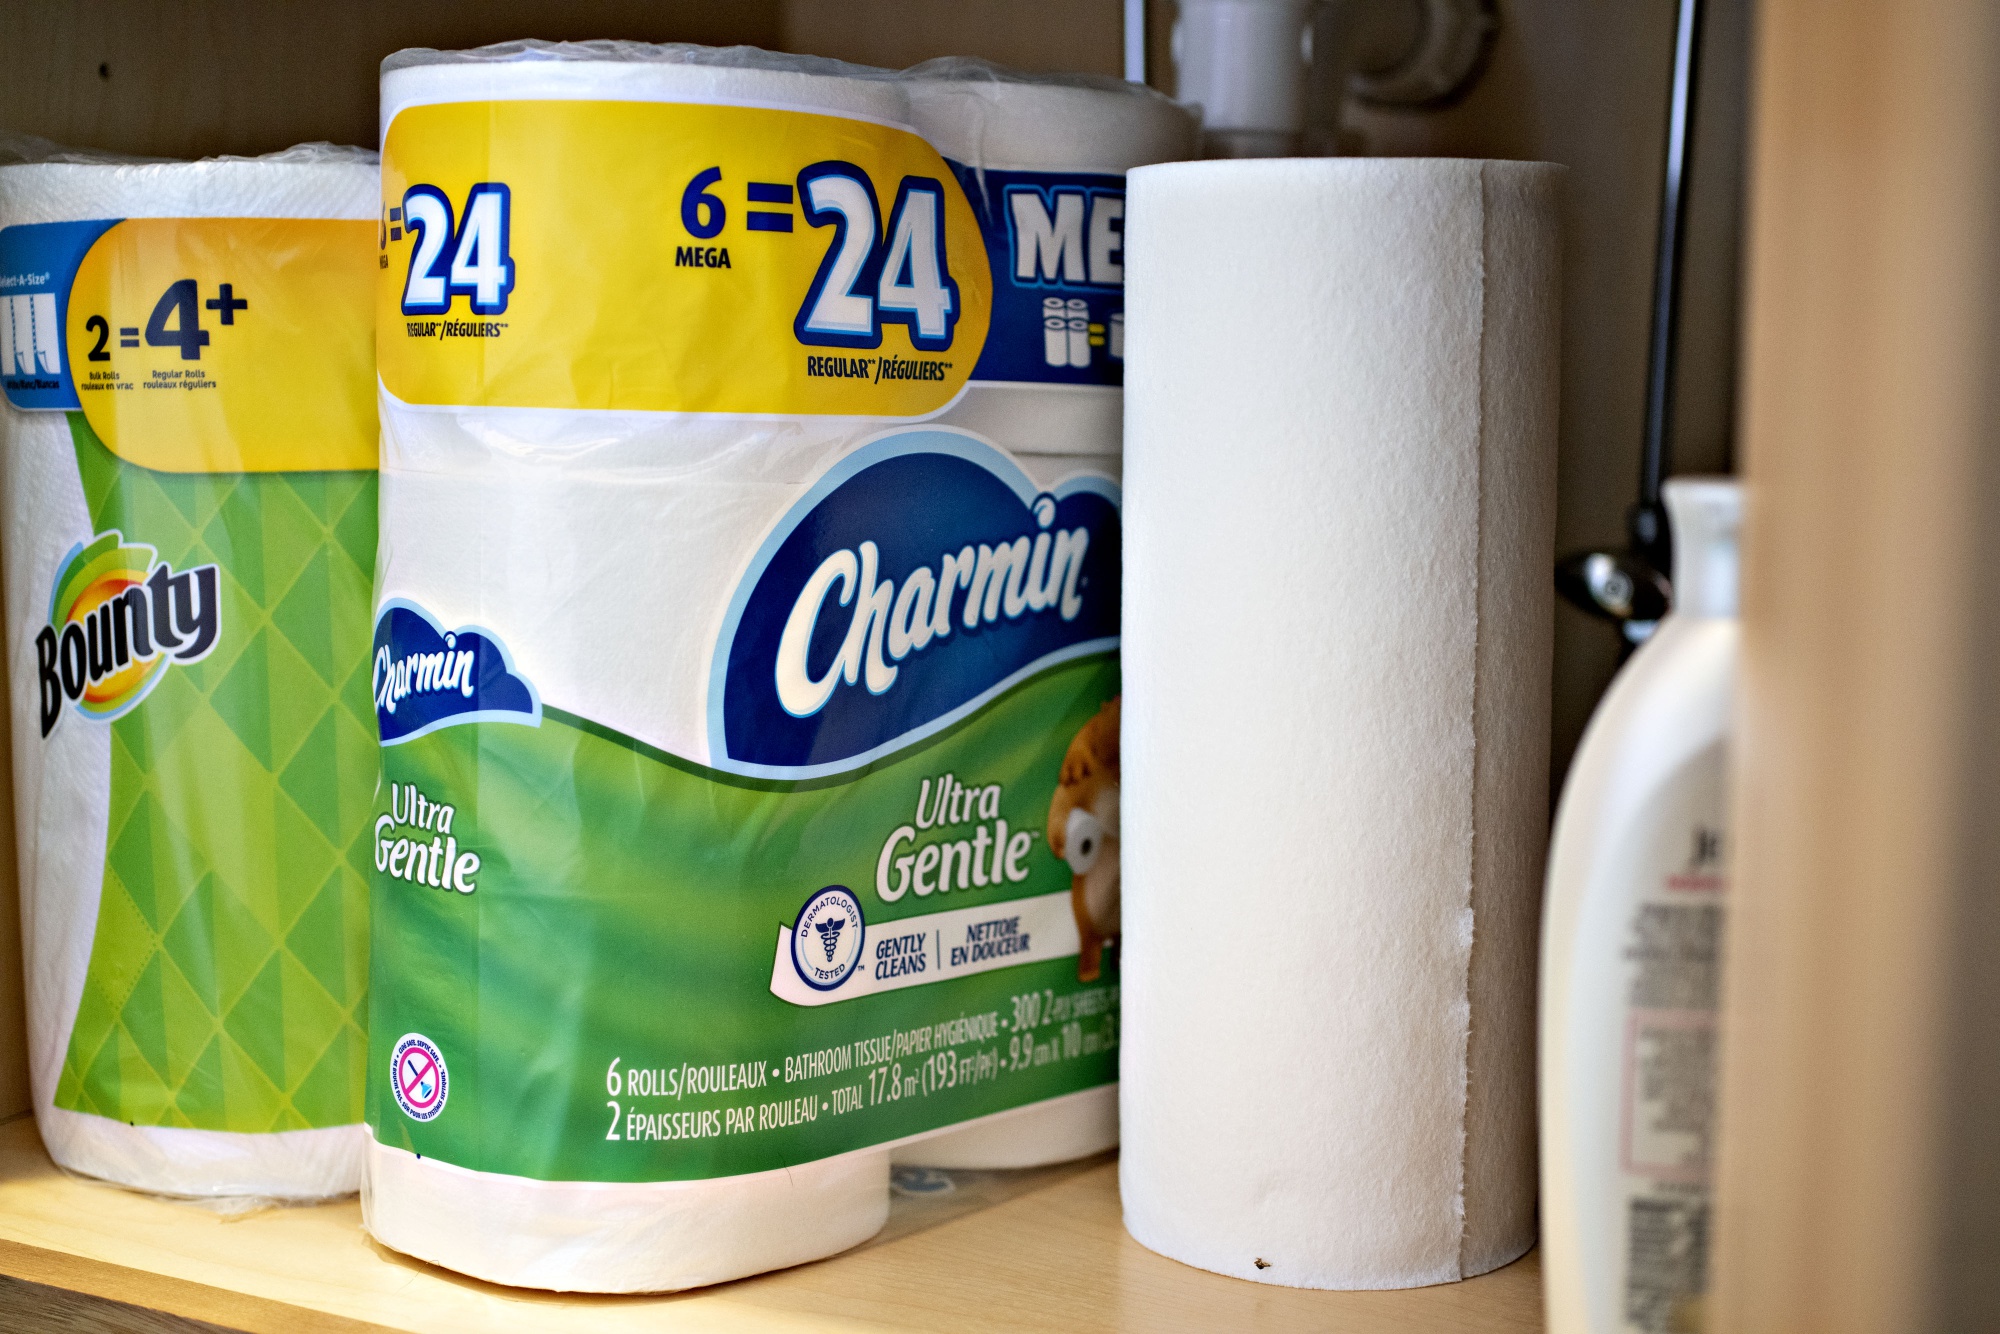 P&G expects inflation to continue impacting profitability